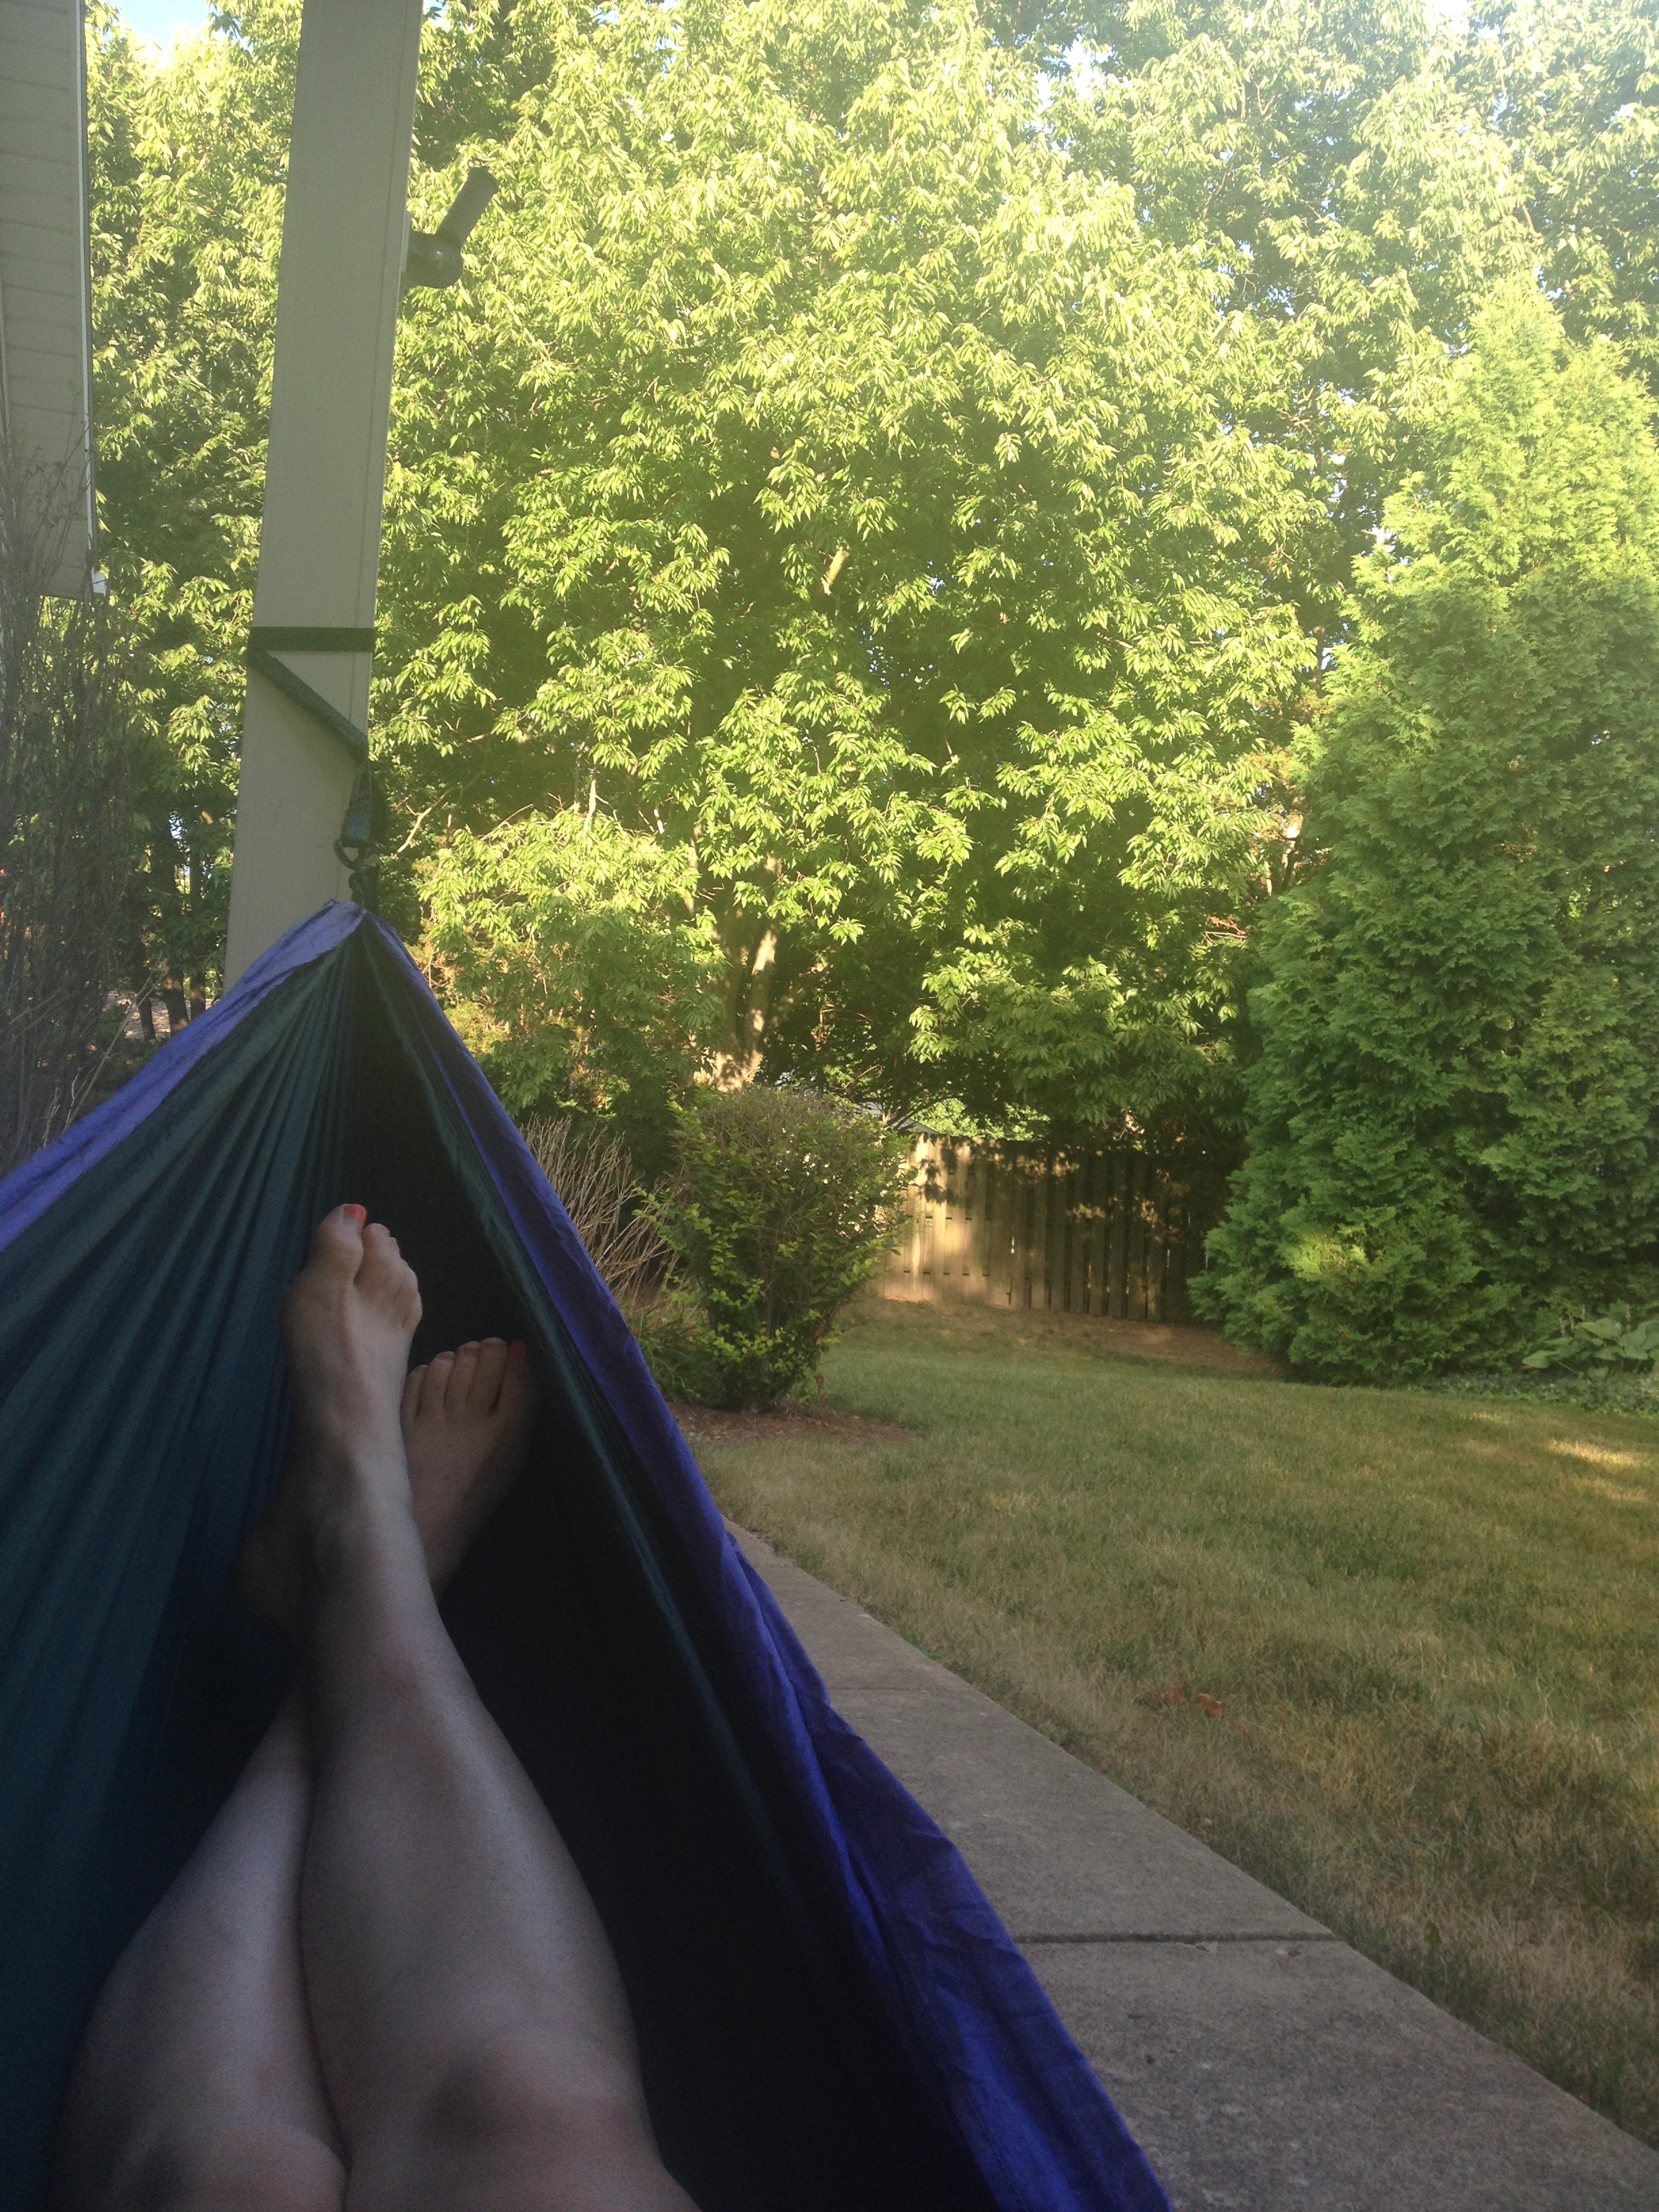 View from hammock.